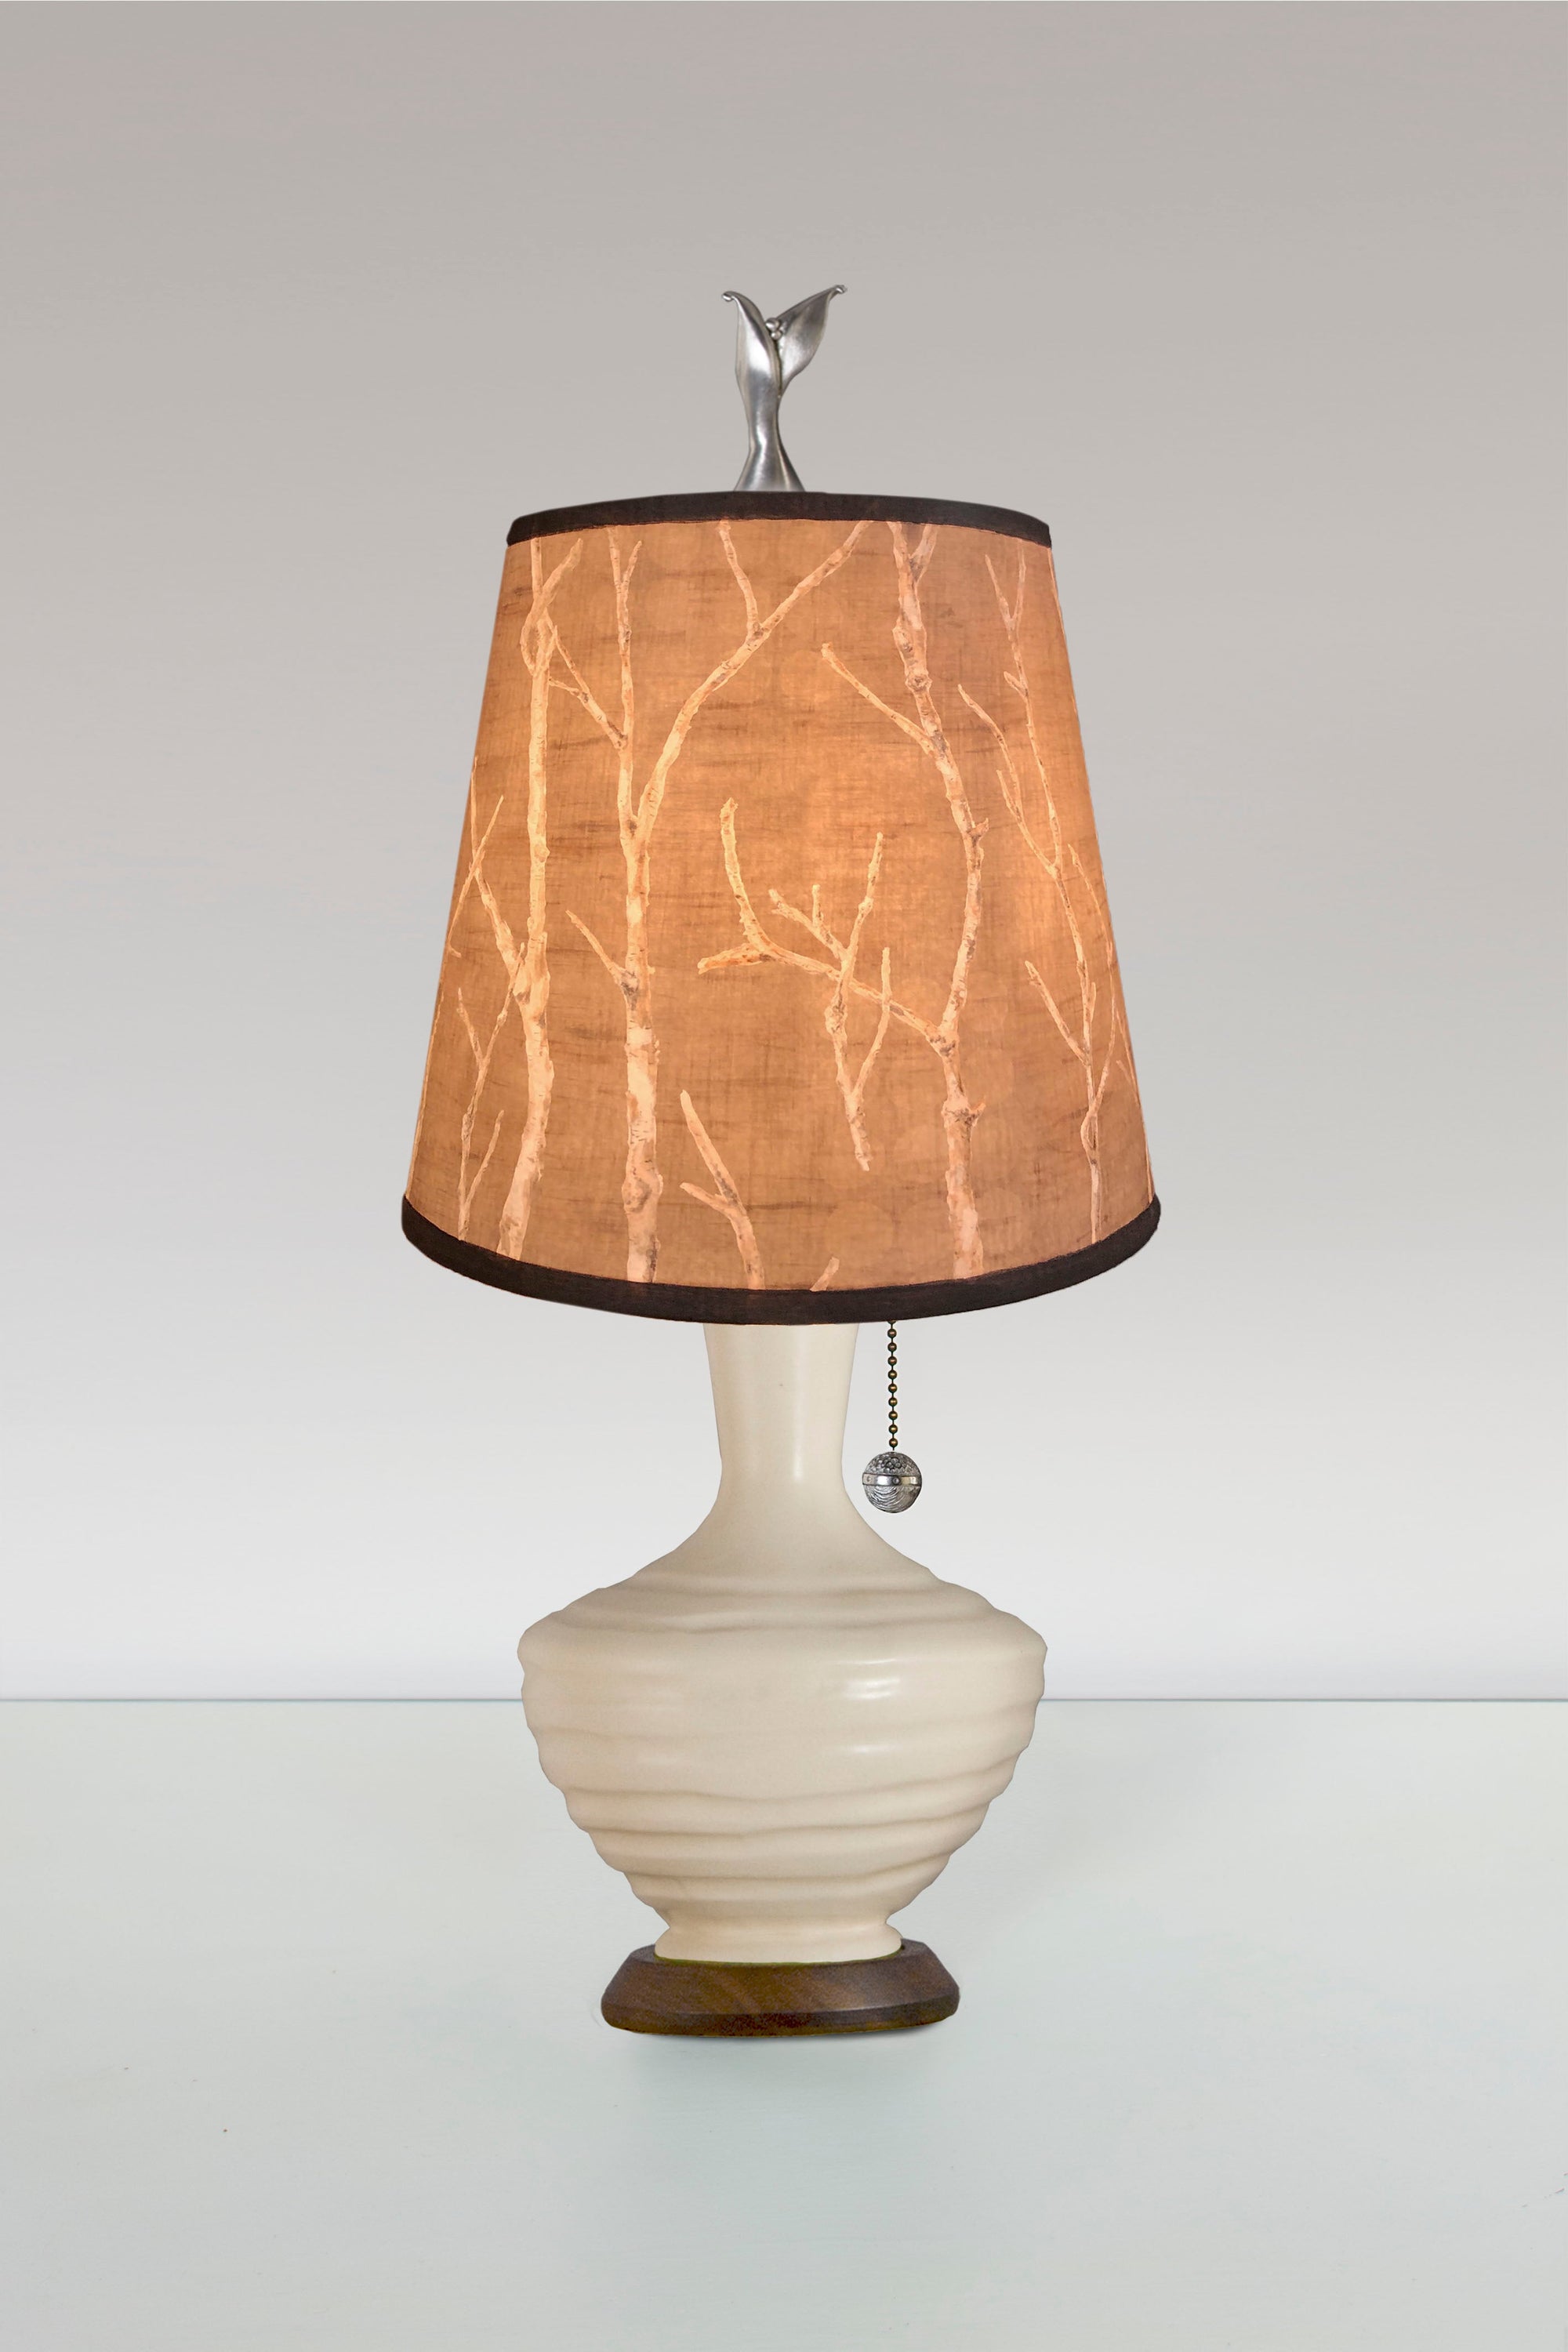 Janna Ugone & Co Table Lamps Ceramic Table Lamp in Ivory Glaze with Small Drum Shade in Twigs